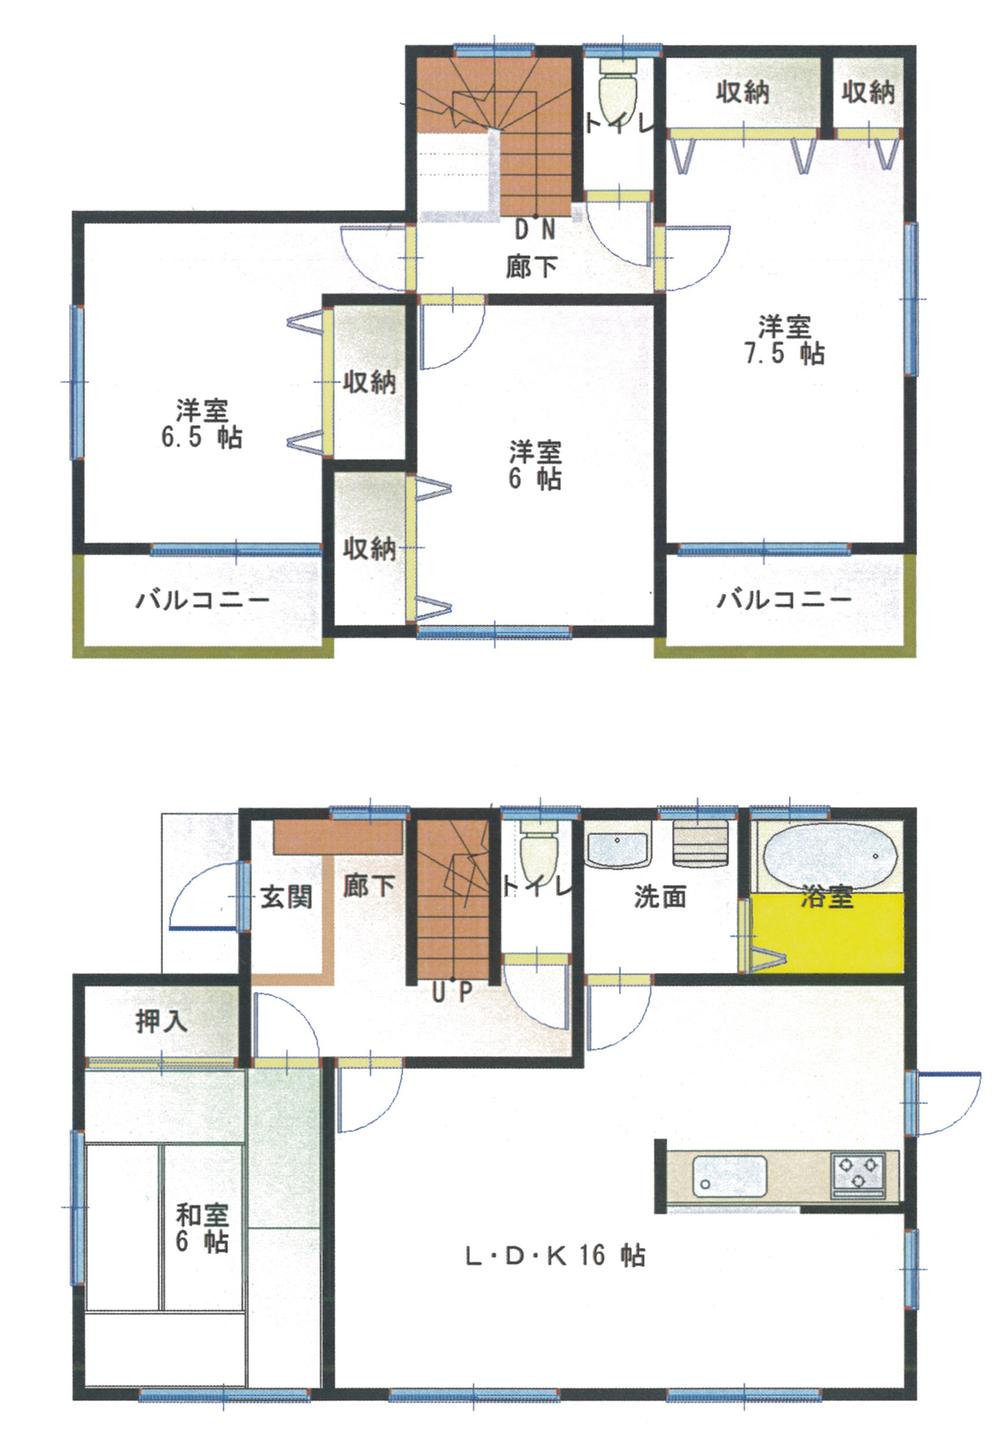 Floor plan. 16.8 million yen, 4LDK, Land area 222.26 sq m , If the building area 101.02 sq m drawings and the present situation is different, it has a priority to the present situation. 